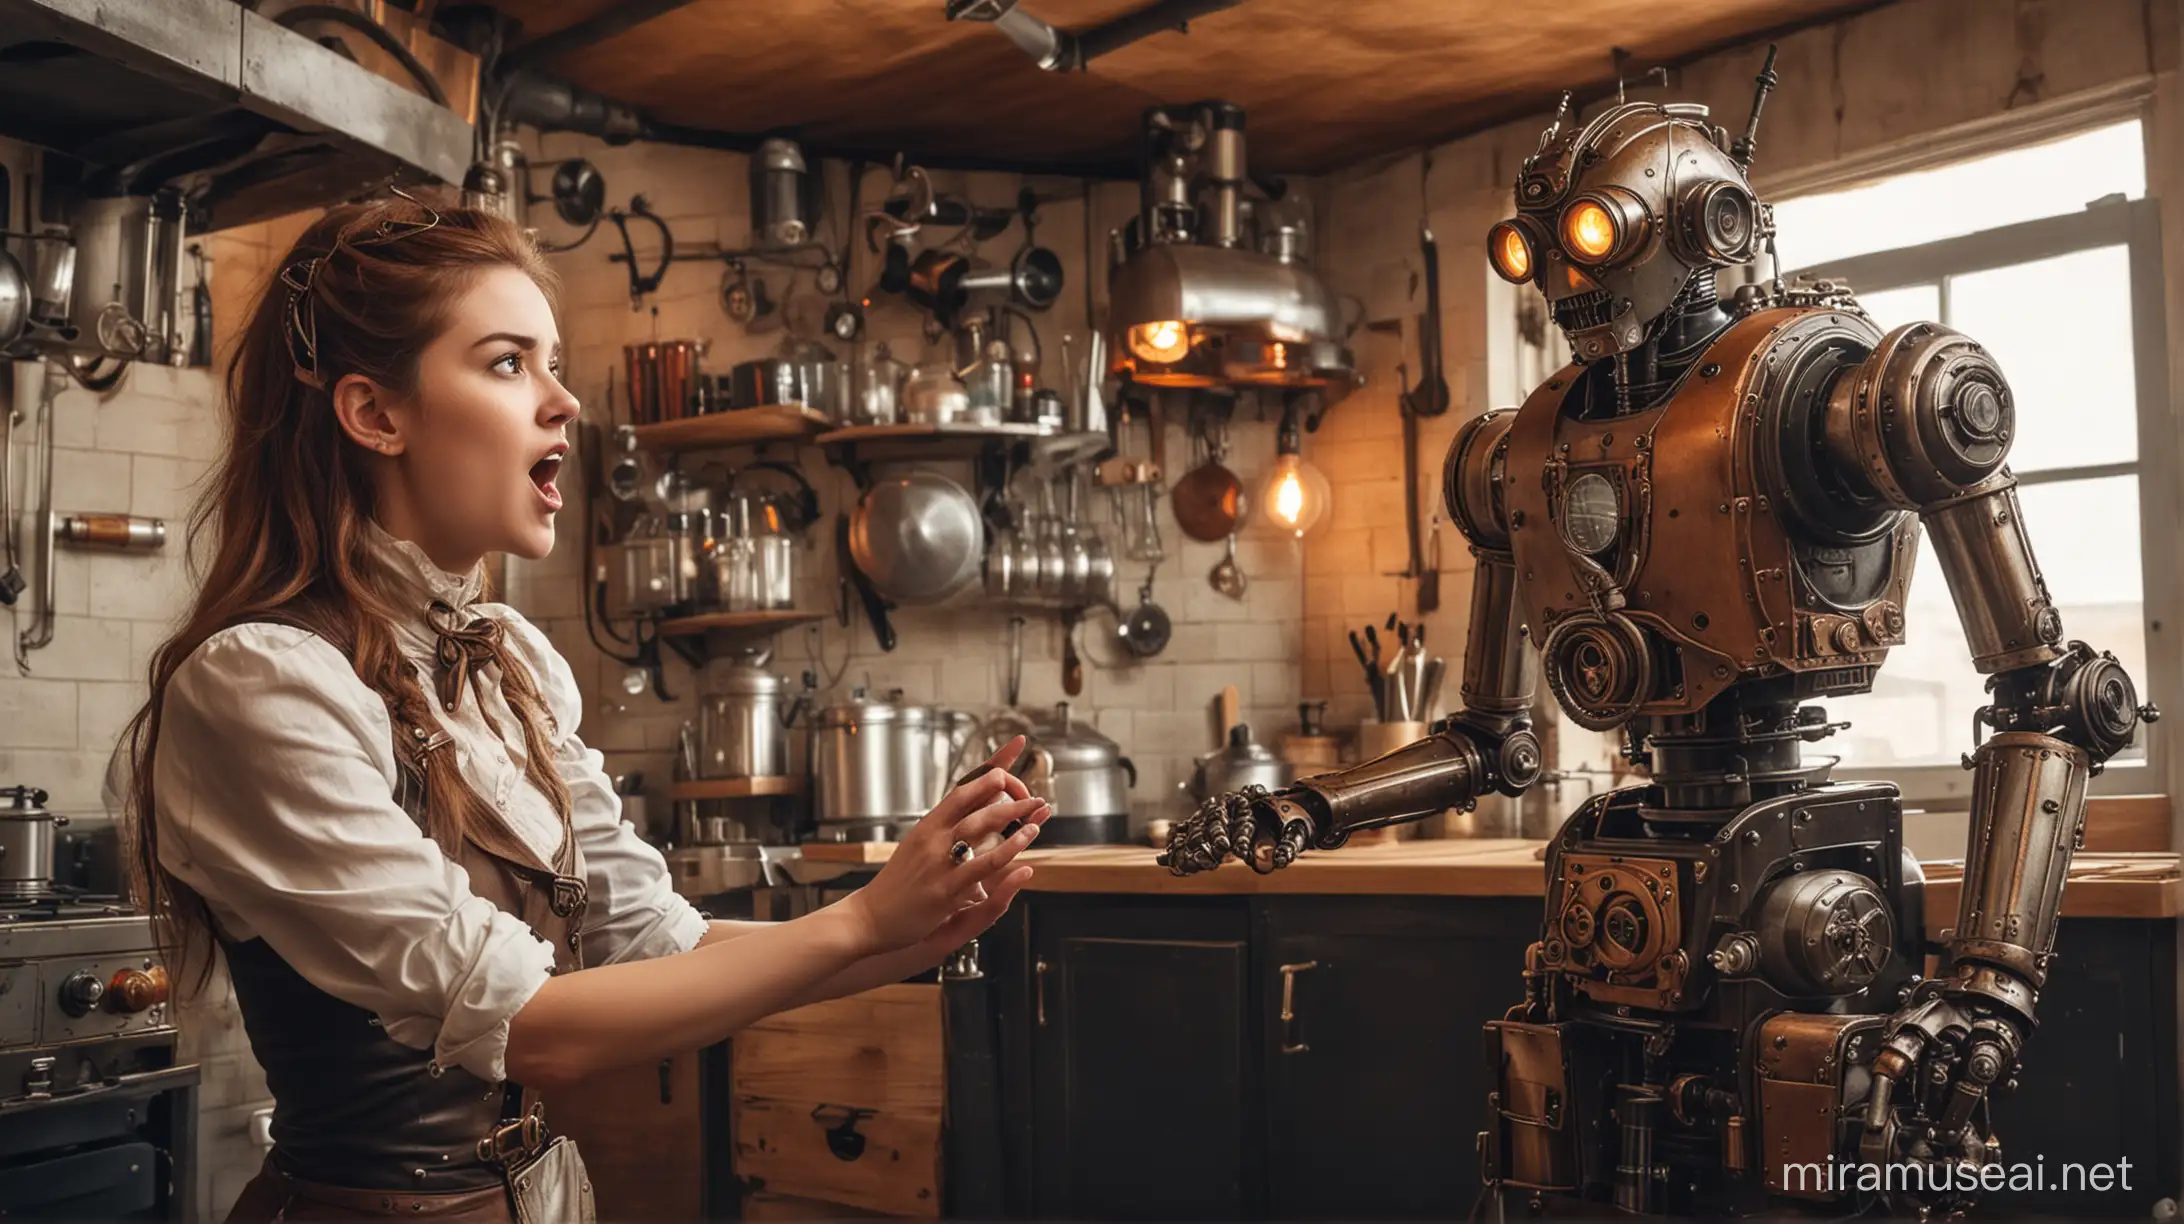 Young steampunk woman shouts at a steampunk robot in a steampunk kitchen.